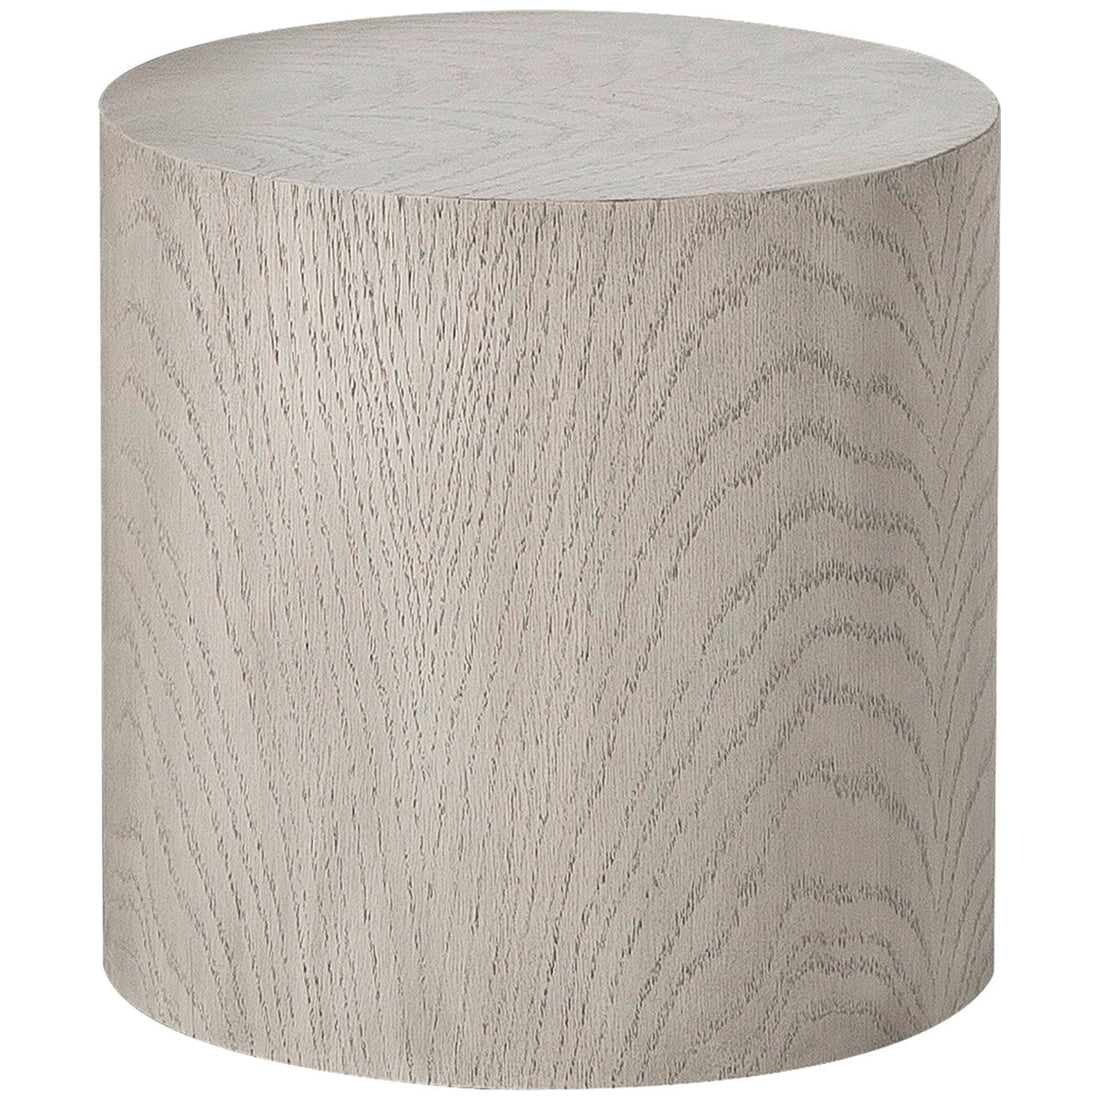 Kelly Hoppen Morgan Round Accent Table - Taupe Oak